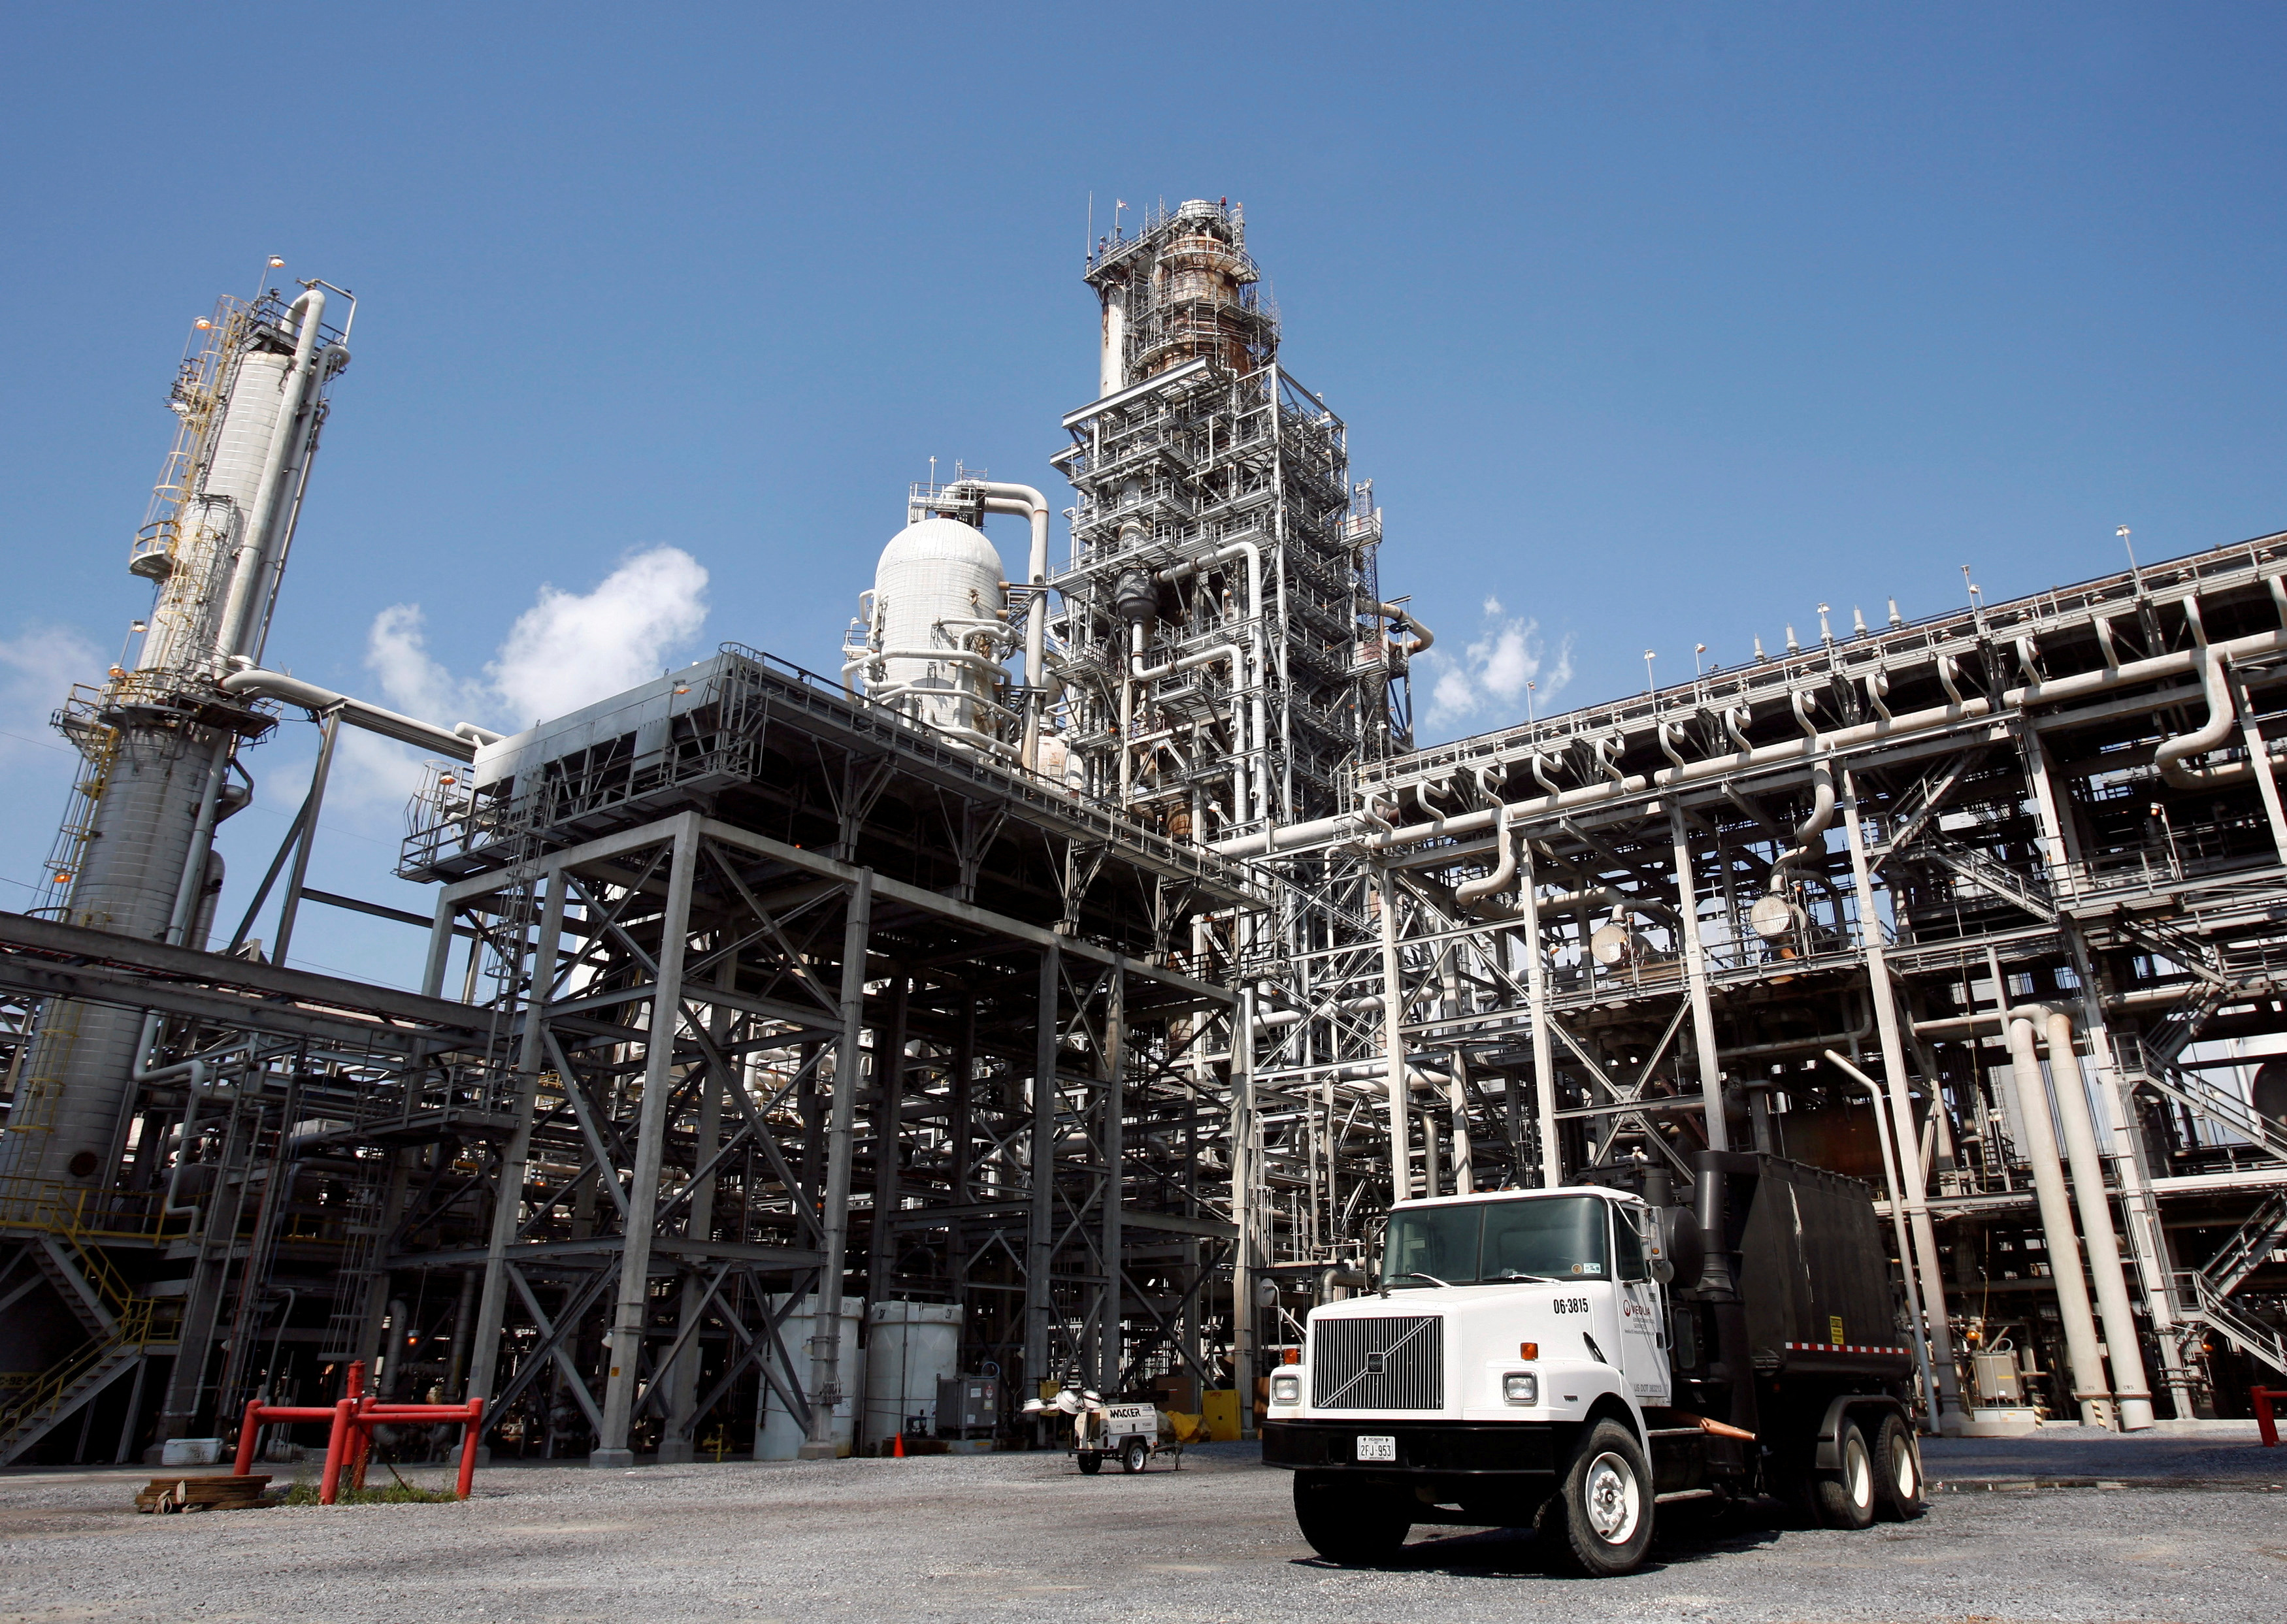 The Valero St. Charles oil refinery is seen during a tour of the refinery in Norco